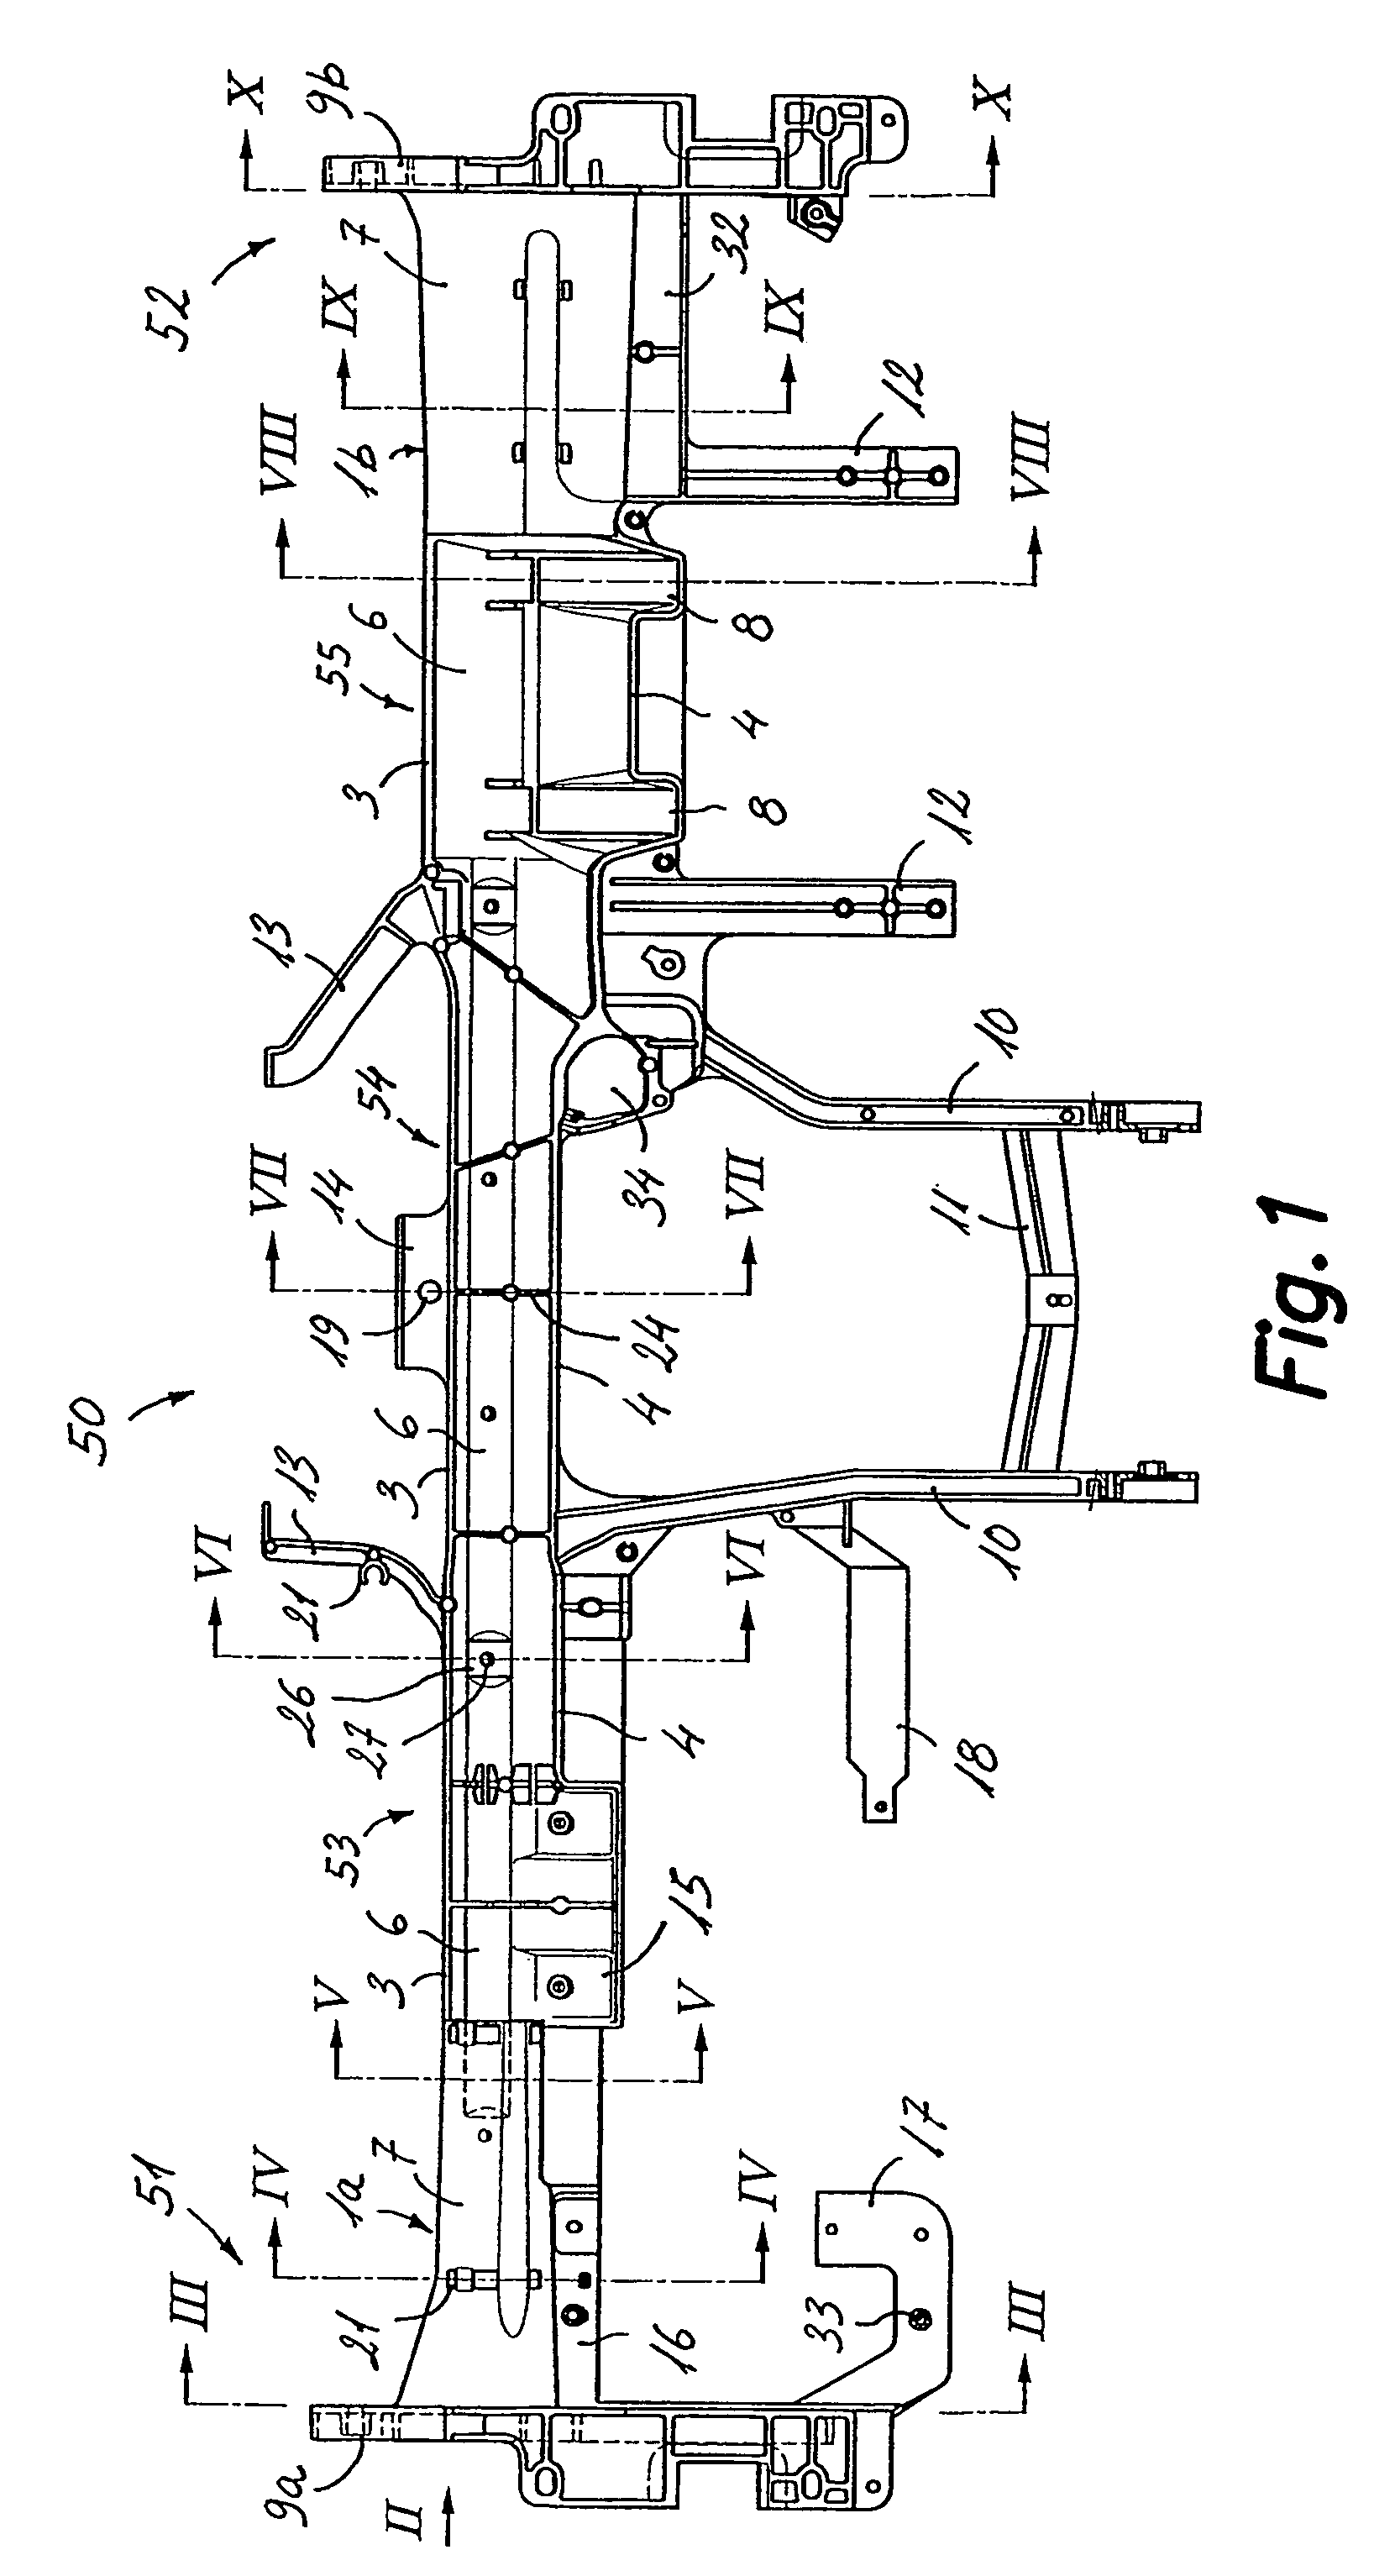 Support crossbeam for an instrument panel